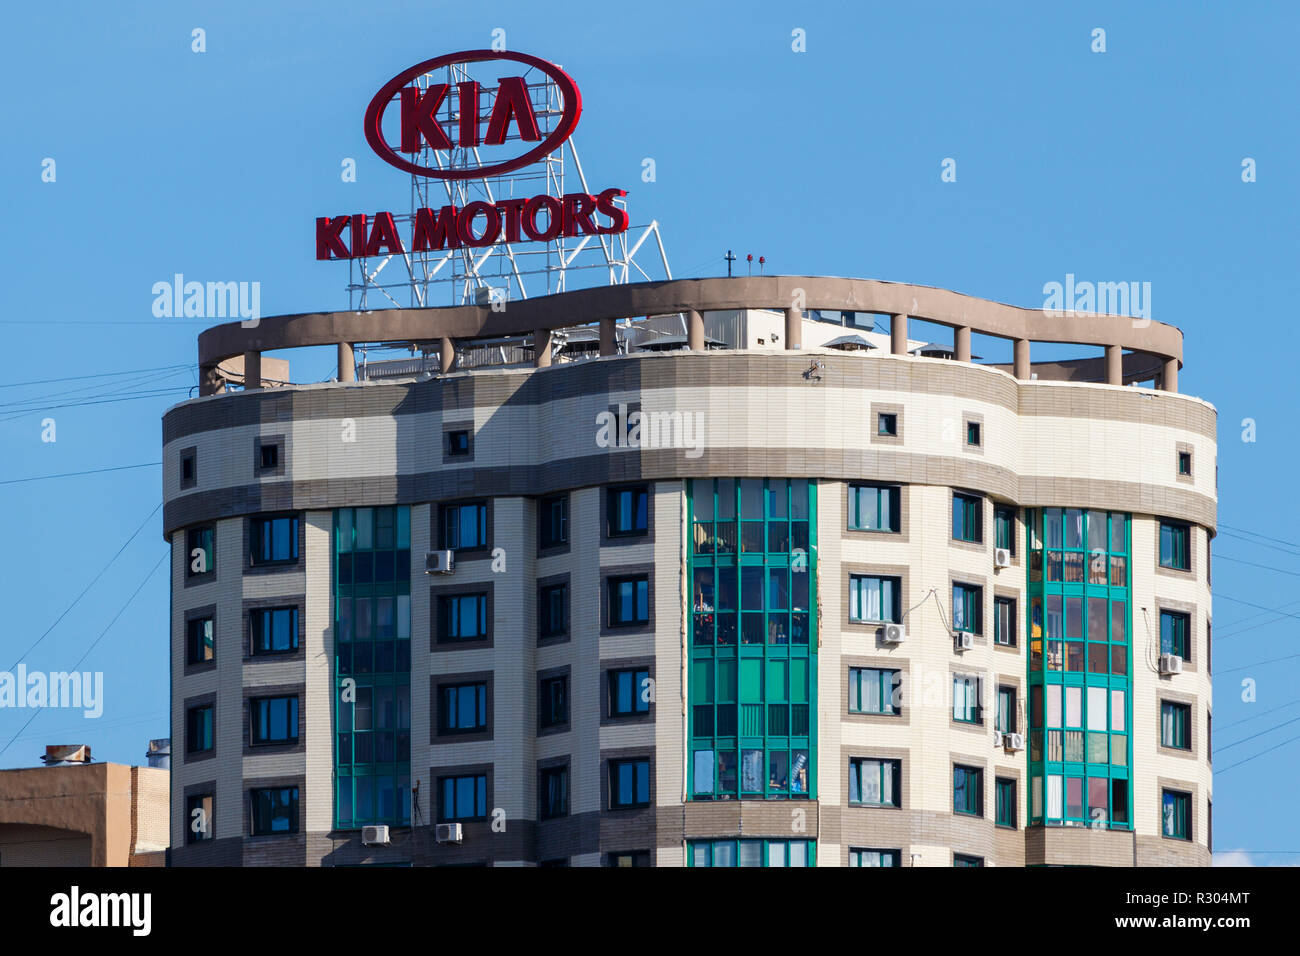 Kia Motors advertising sign, illumunated at night, on top of an apartment block in Moscow, Russia. Adjacent to the Moscow canal. Stock Photo